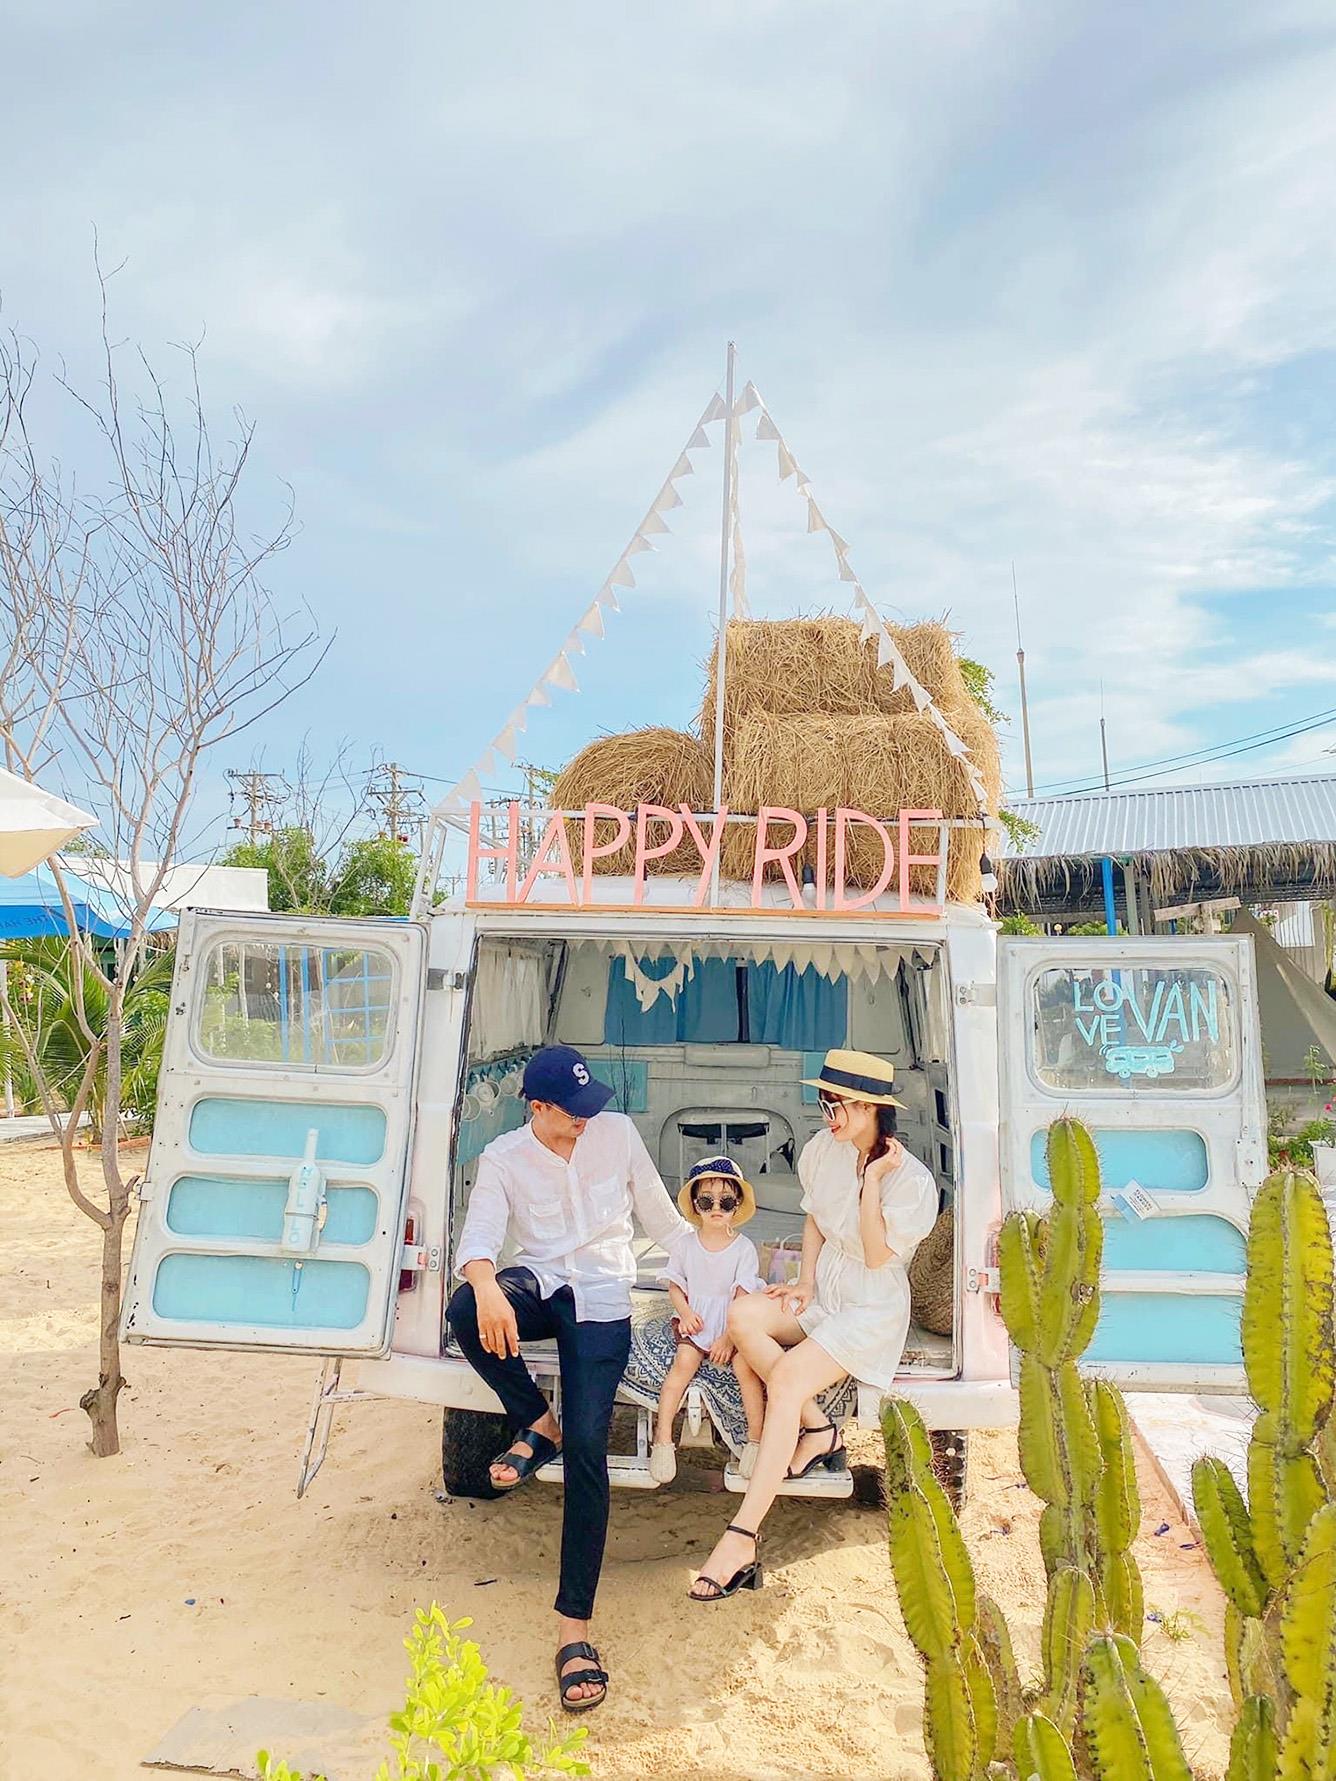 The Happy Ride Glamping